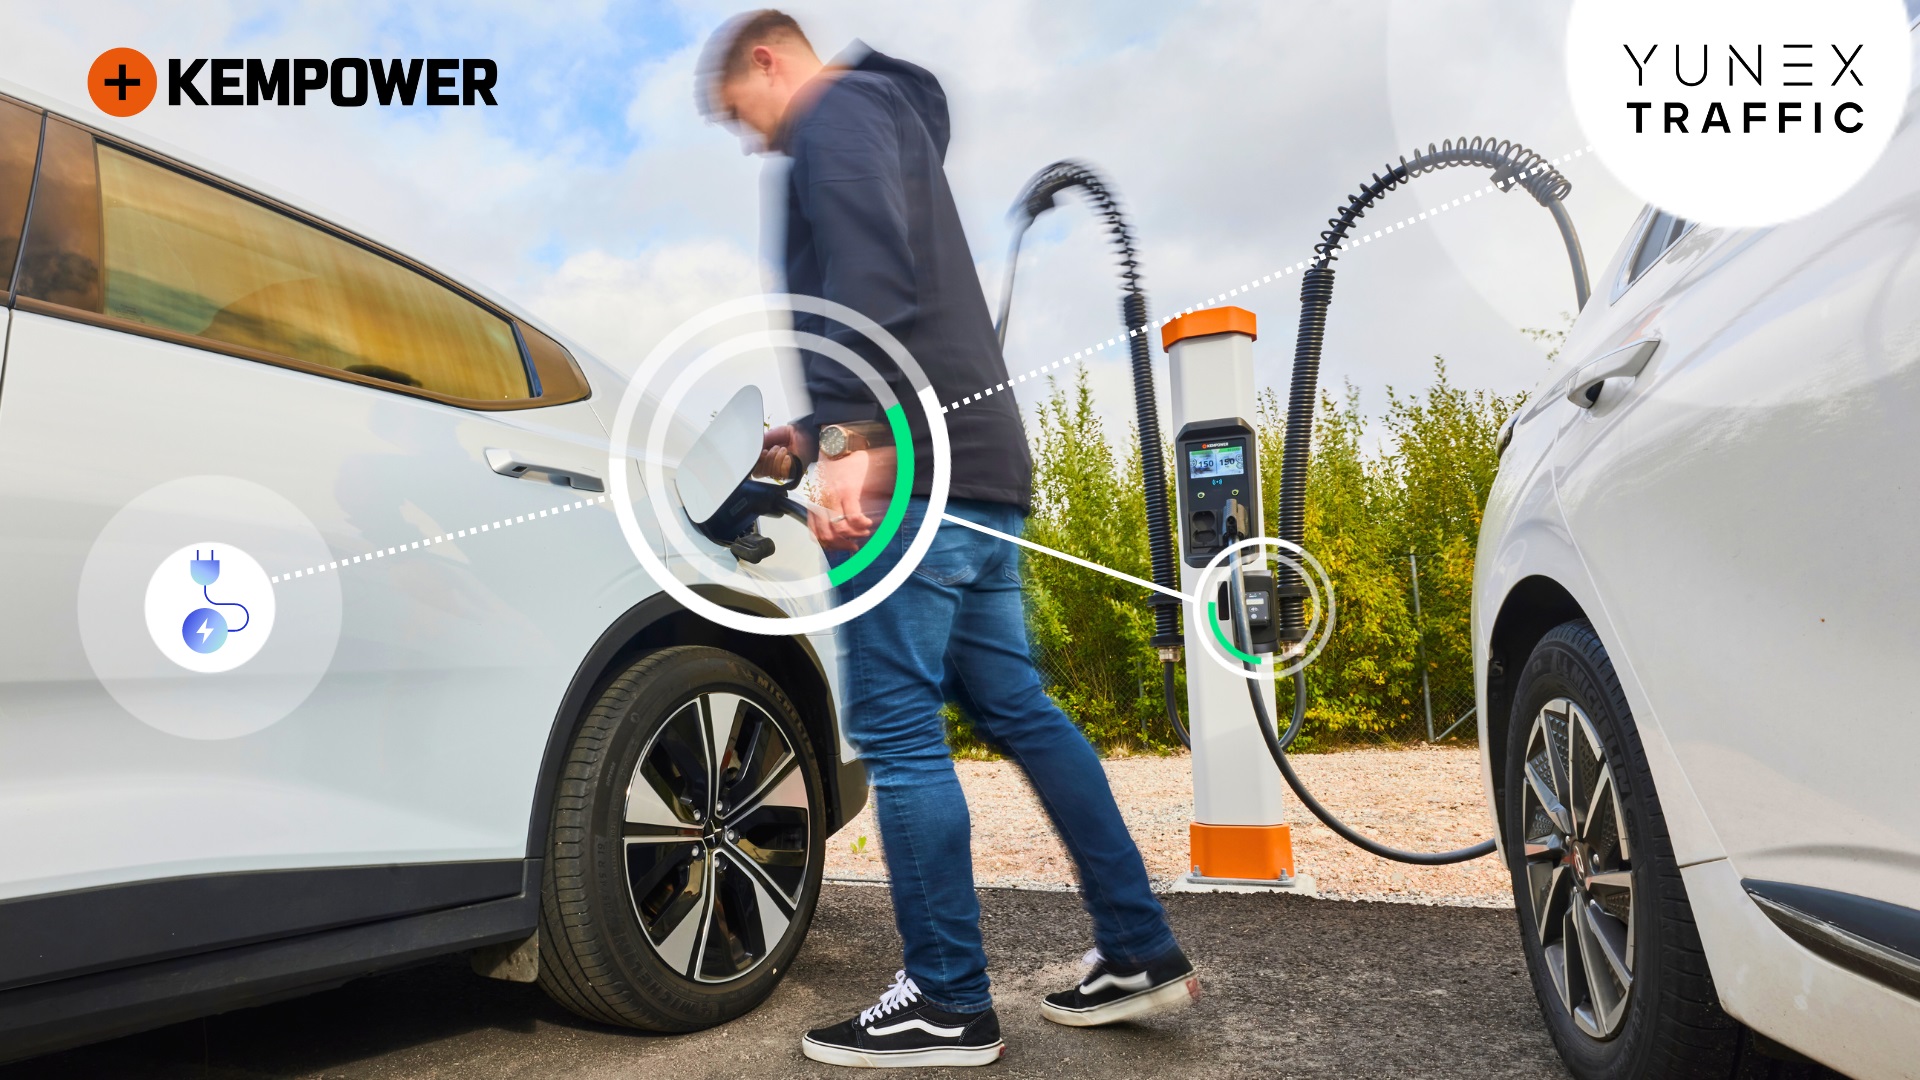 Kempower’s charging solutions and services are the newest addition to Yunex Traffic’s growing list of service partnerships with EV charger manufacturers and charge point operators. Image: Kempower